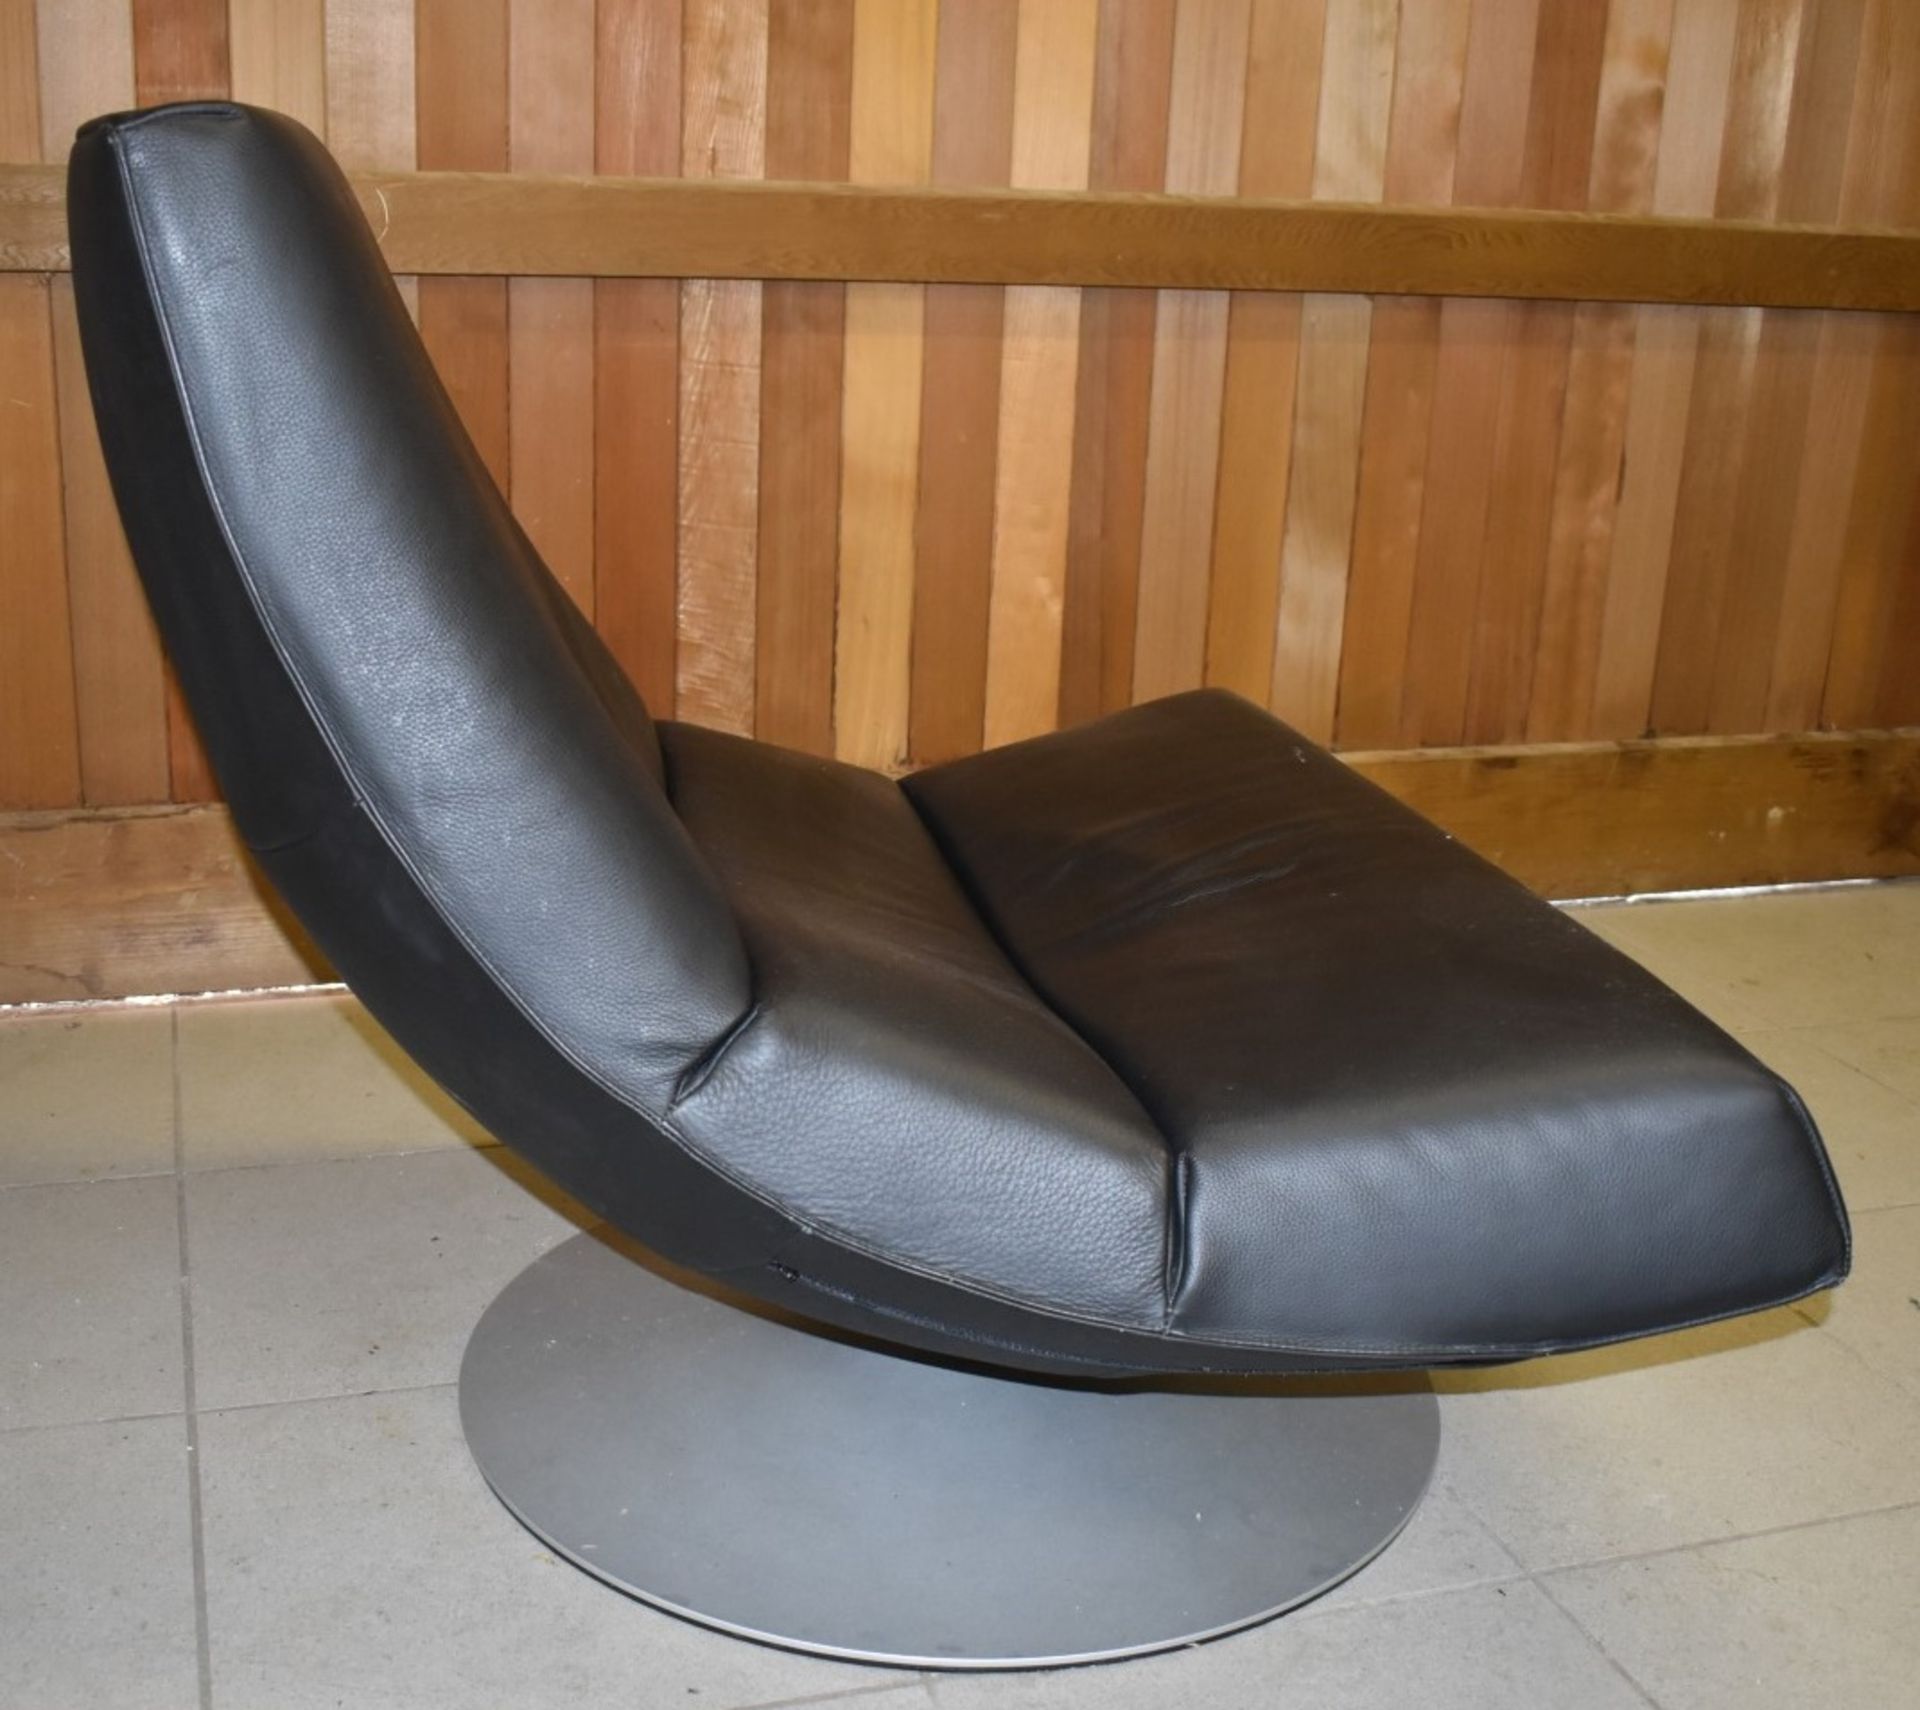 1 x Contemporary Black Leather Swivel Chair With Silver Base - Dimensions: H85/40 x W97 x D100 cms - - Image 3 of 3